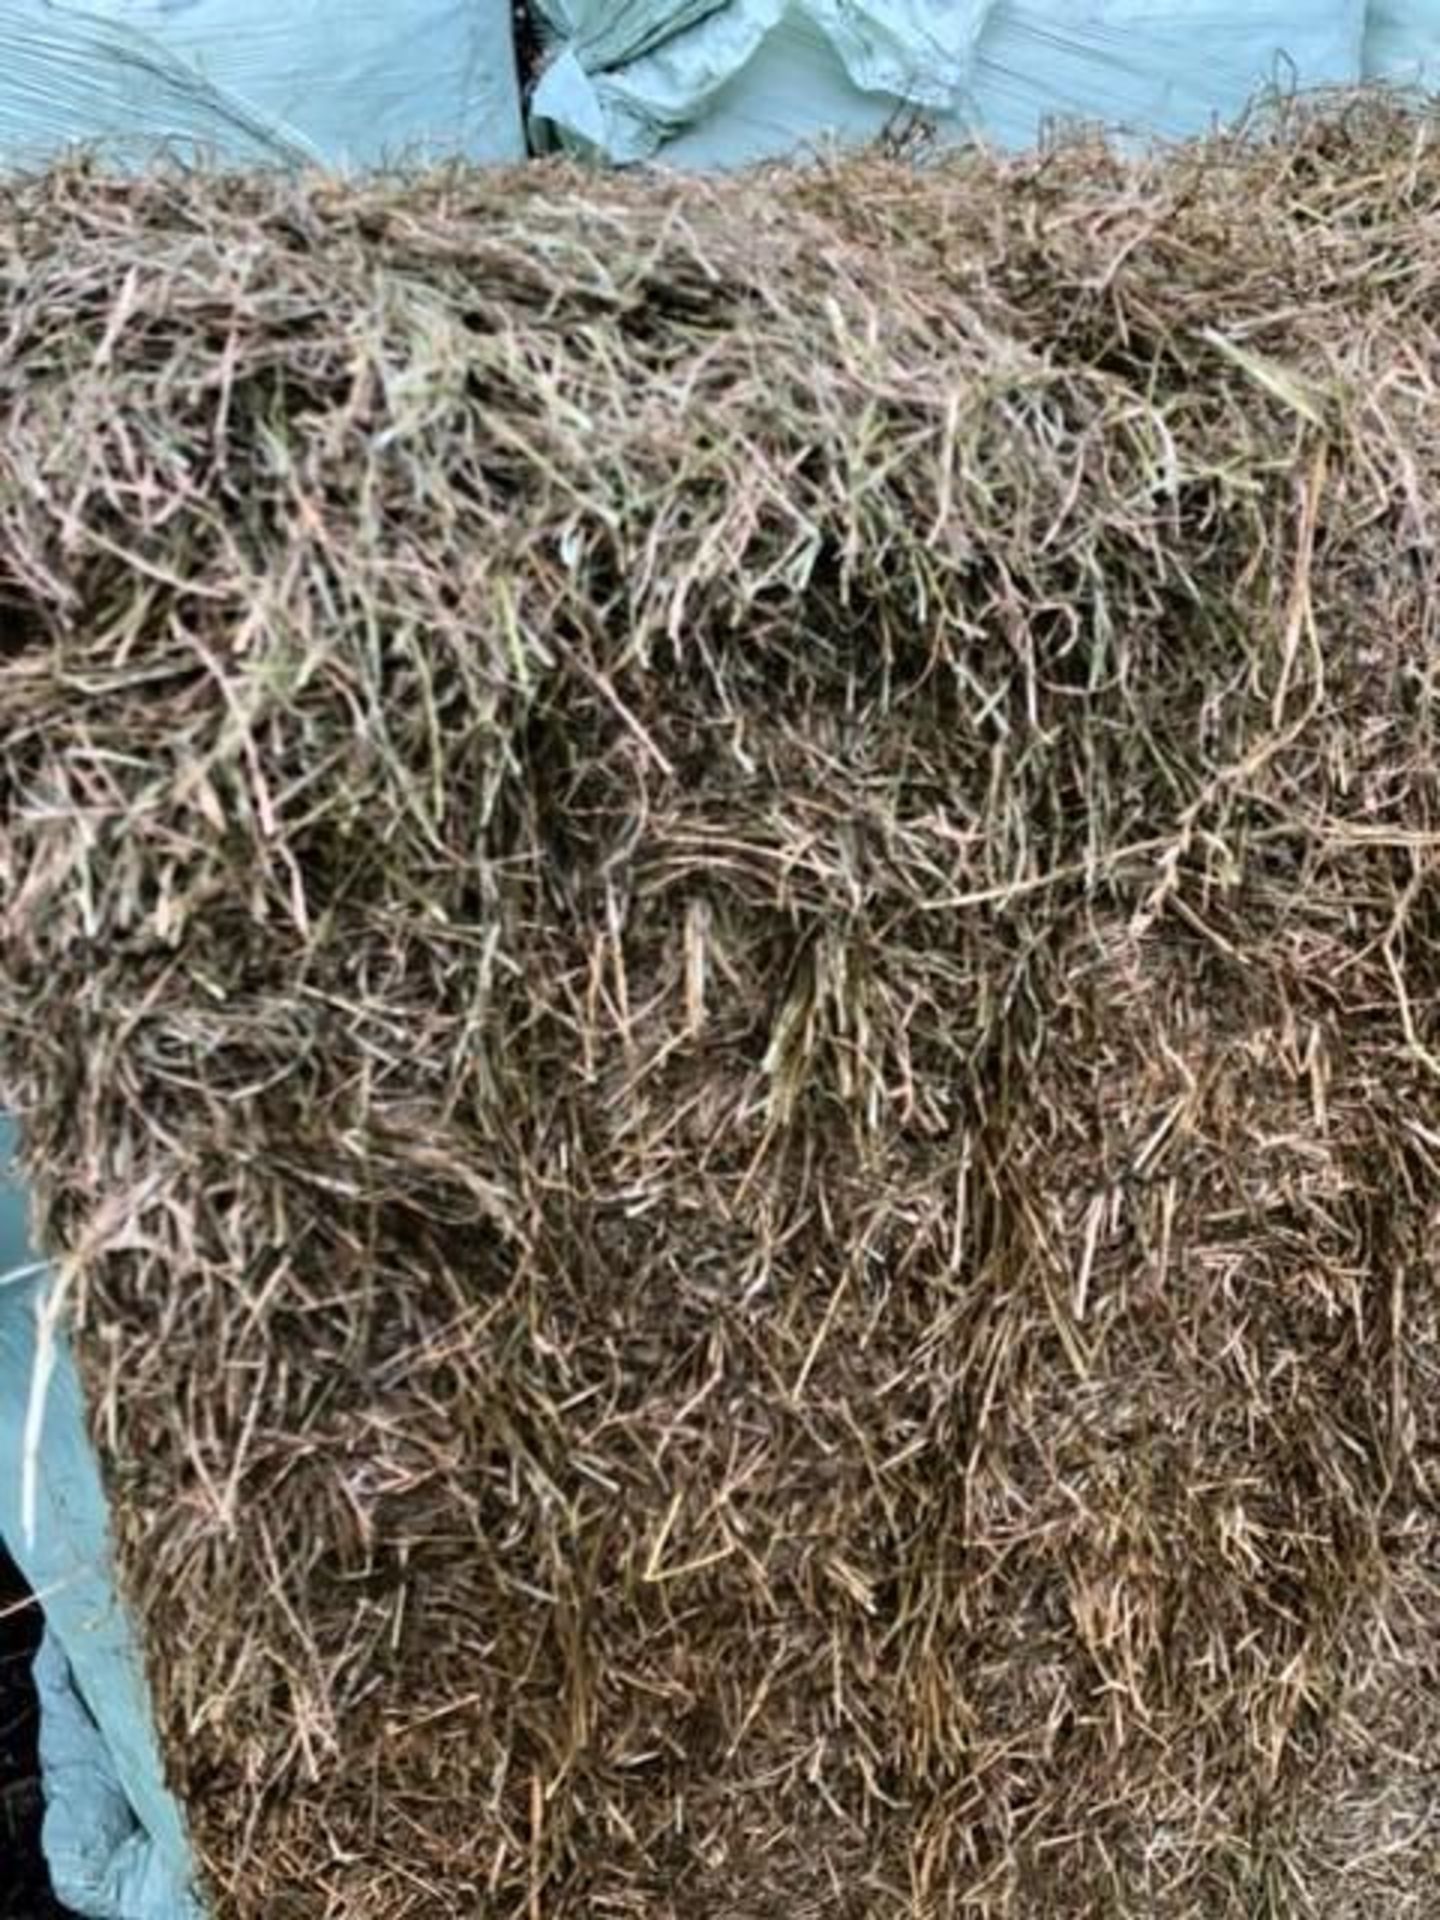 100x 2nd Cut Ryegrass Haylage 2020 - Image 2 of 3